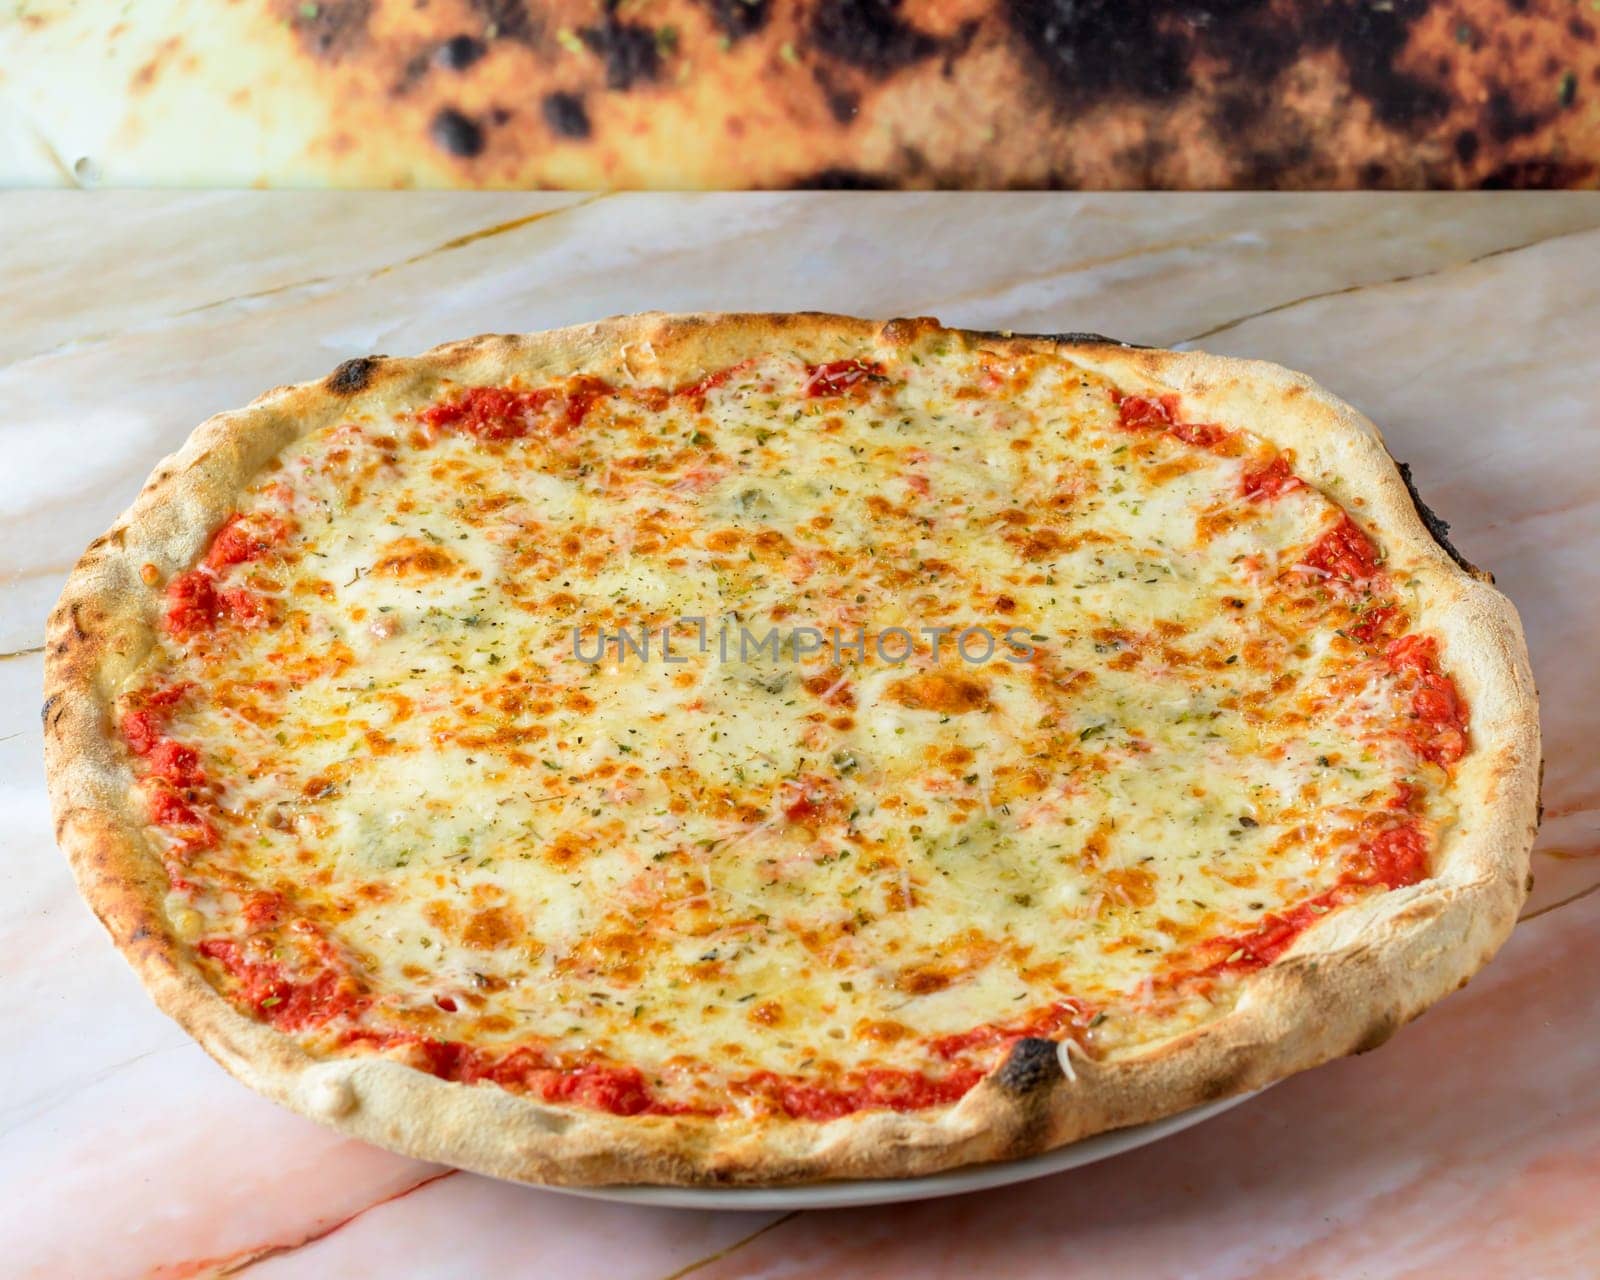 Family Pizza Cooked with Four Cheese Recipe, Oregano and Basile Baked and Ready to Eat,